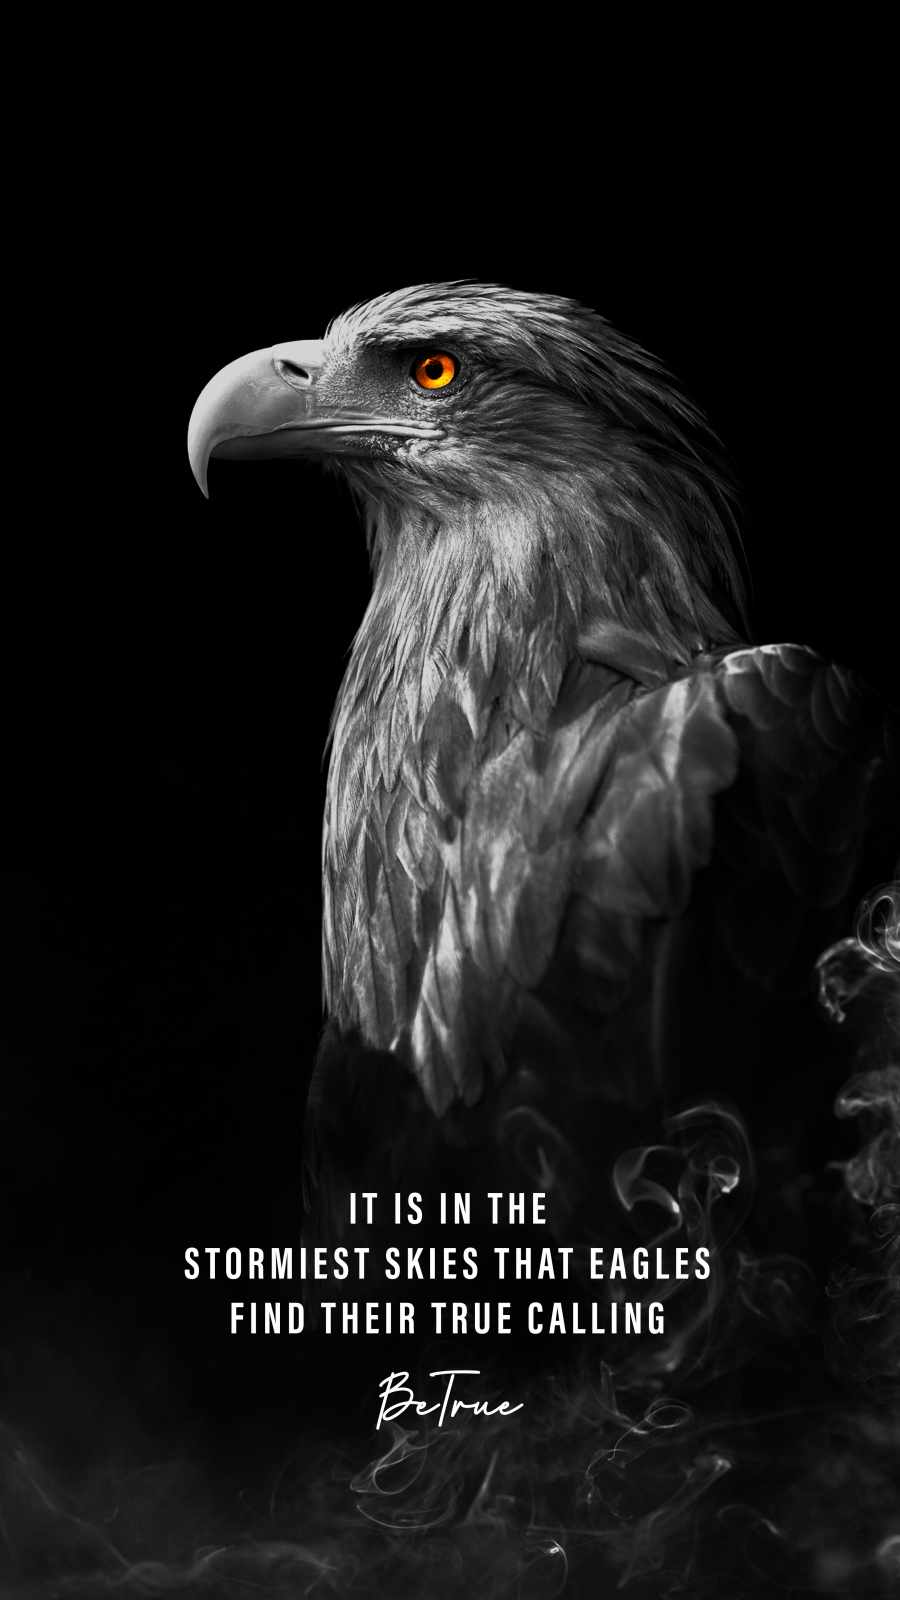 Eagle Quote IPhone Wallpaper - IPhone Wallpapers : iPhone Wallpapers